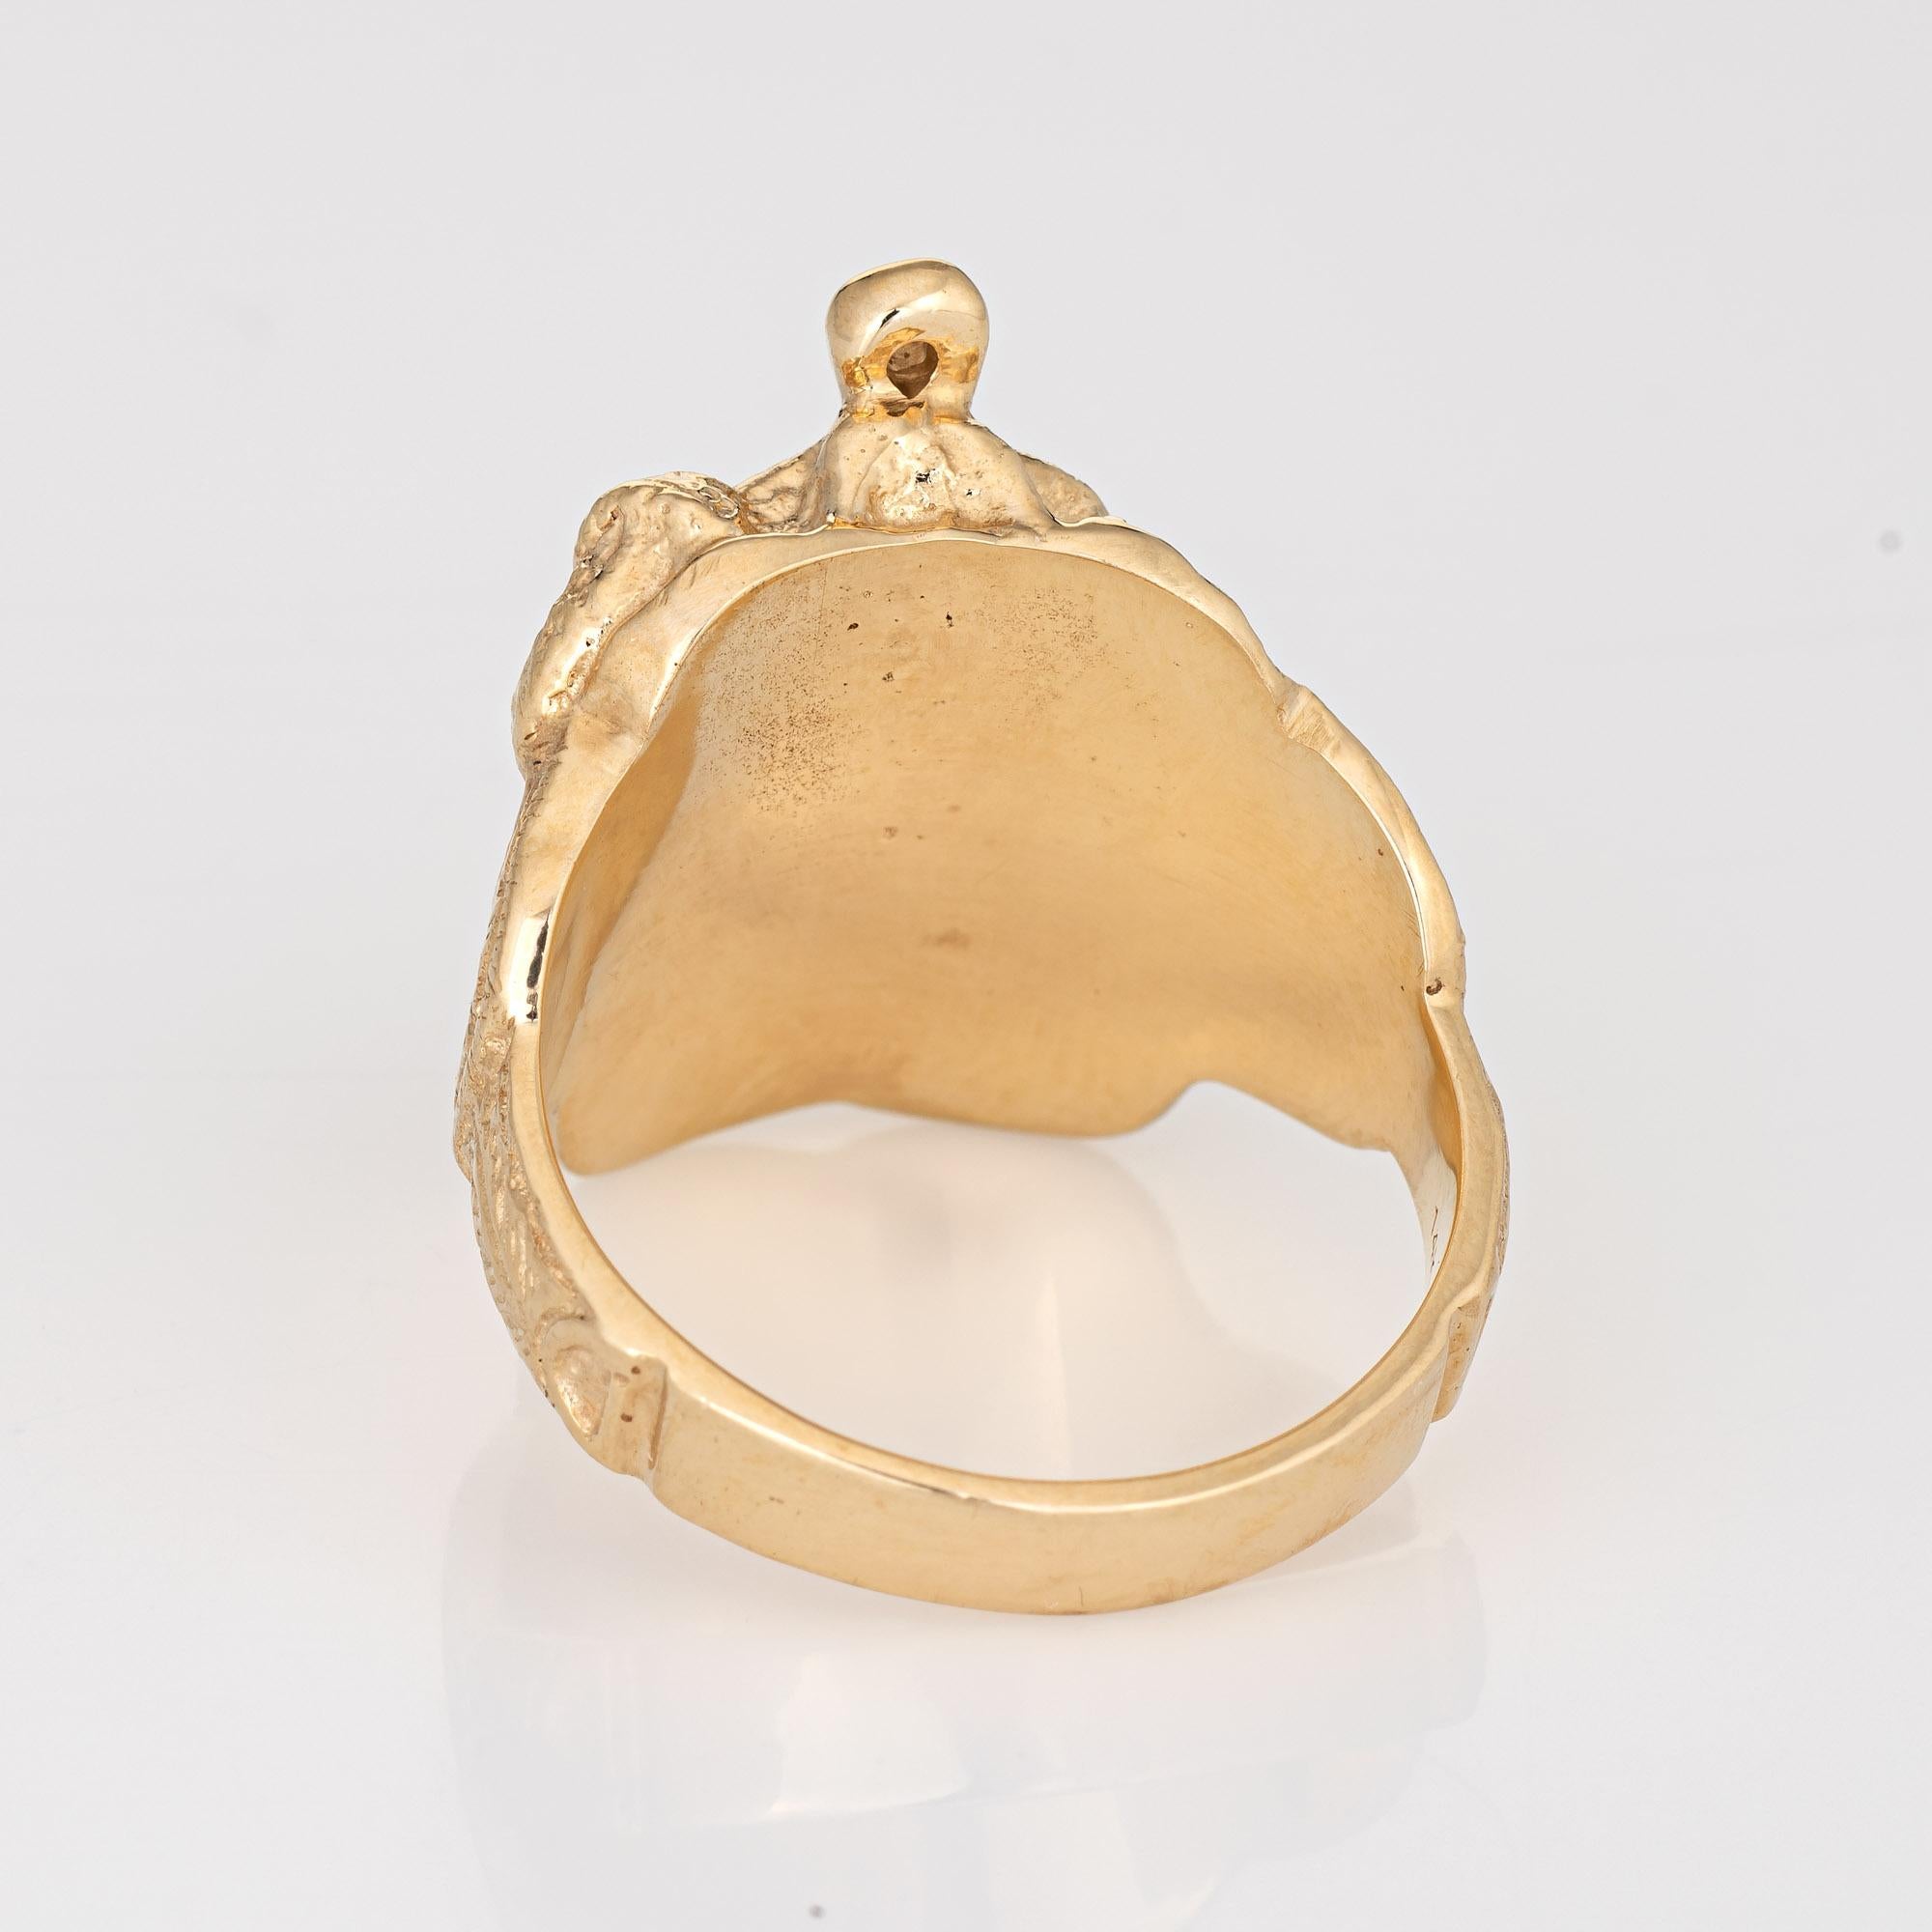 Round Cut Vintage Saddle Ring Diamond 14k Yellow Gold Horse Equestrian Jewelry